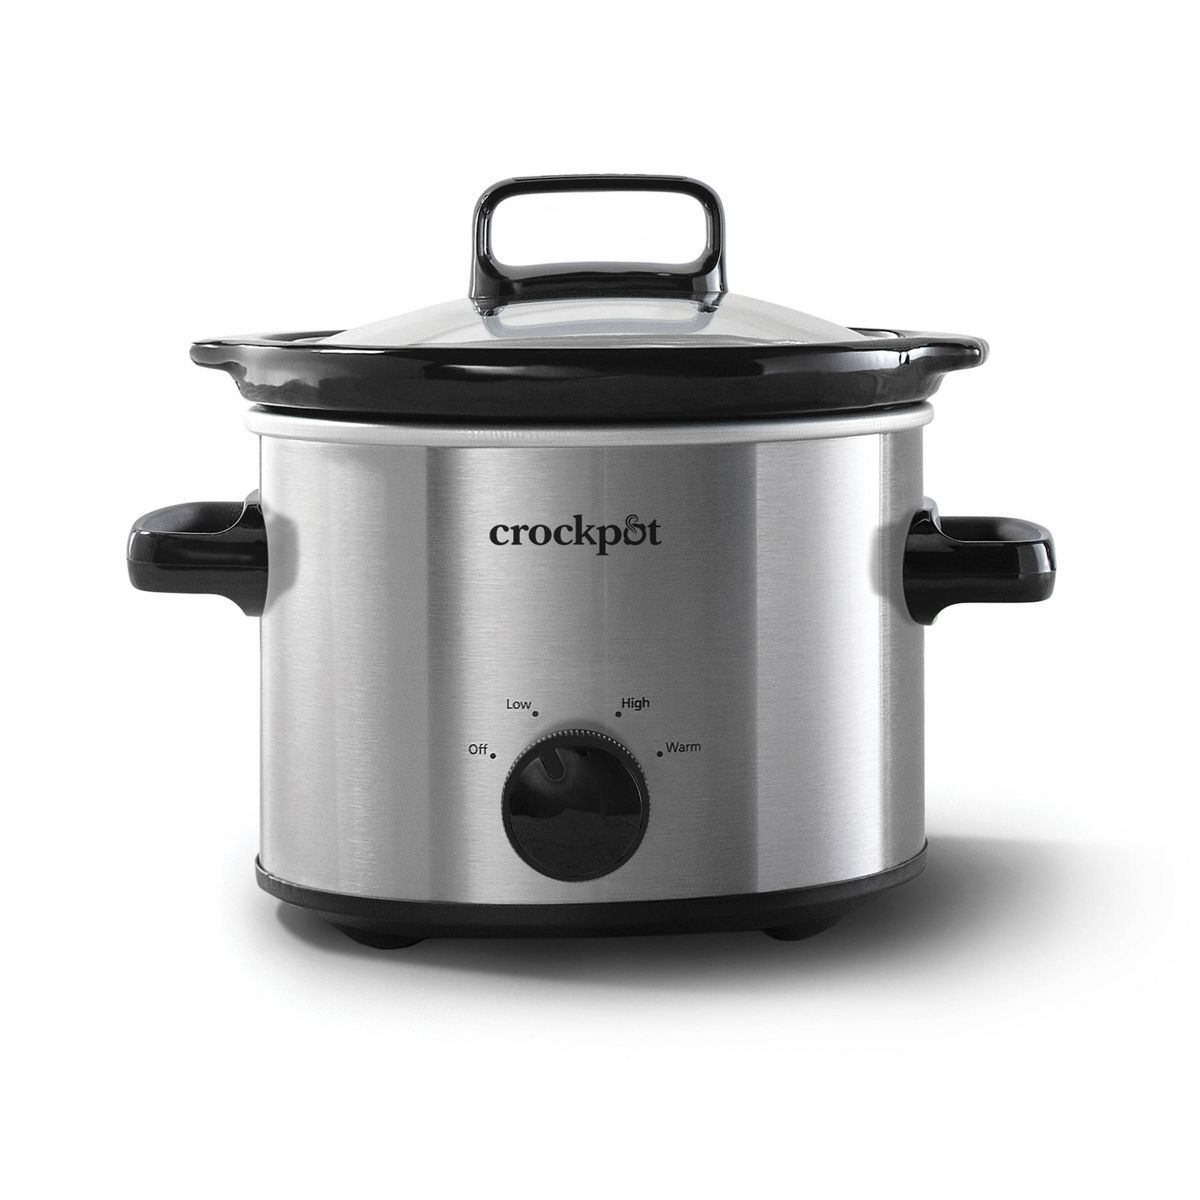 Crock-Pot 2qt Slow Cooker - Classic Stainless Steel | Target